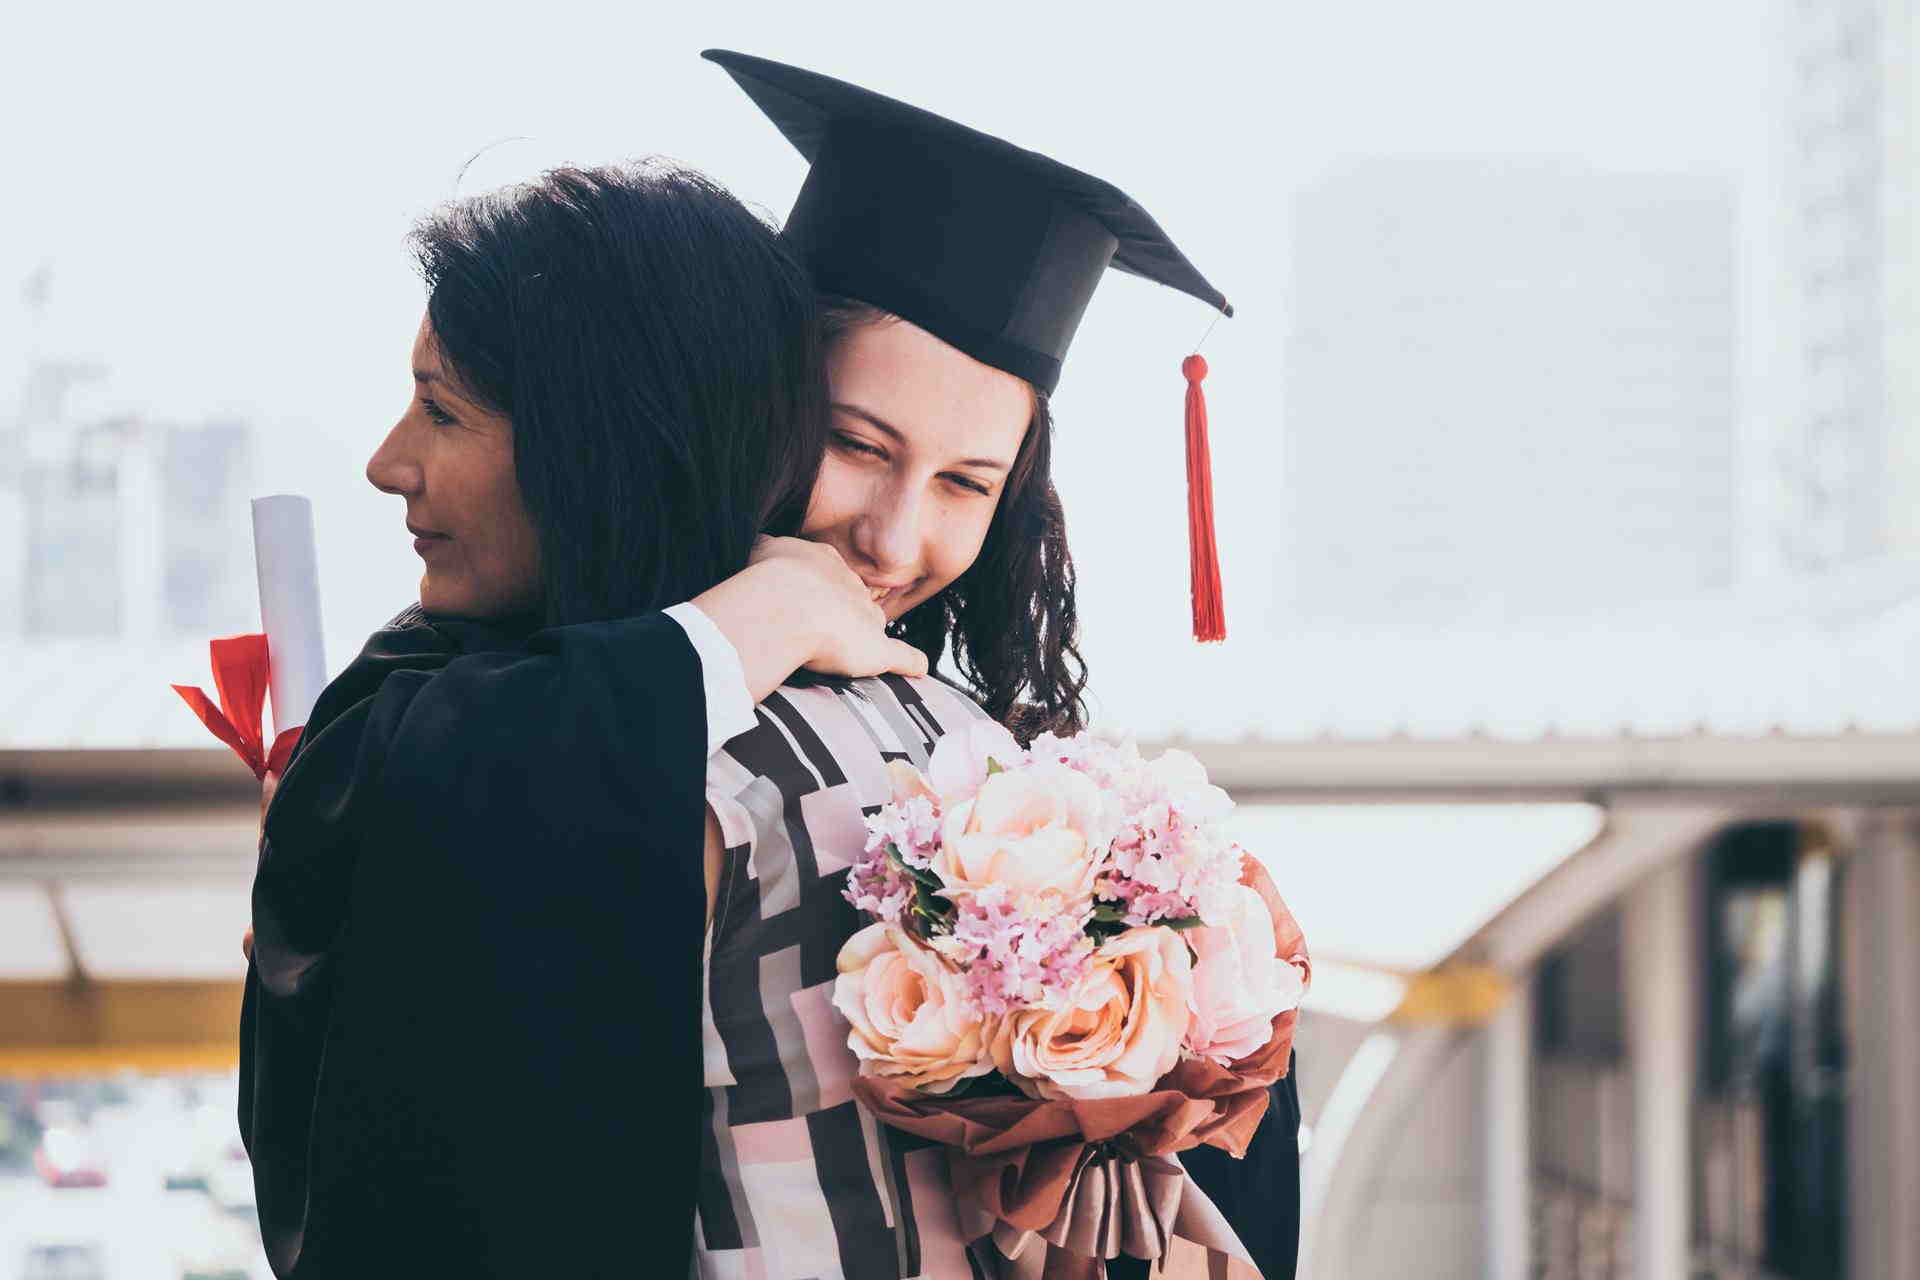 mother-daughter-embracing-on-graduation-day